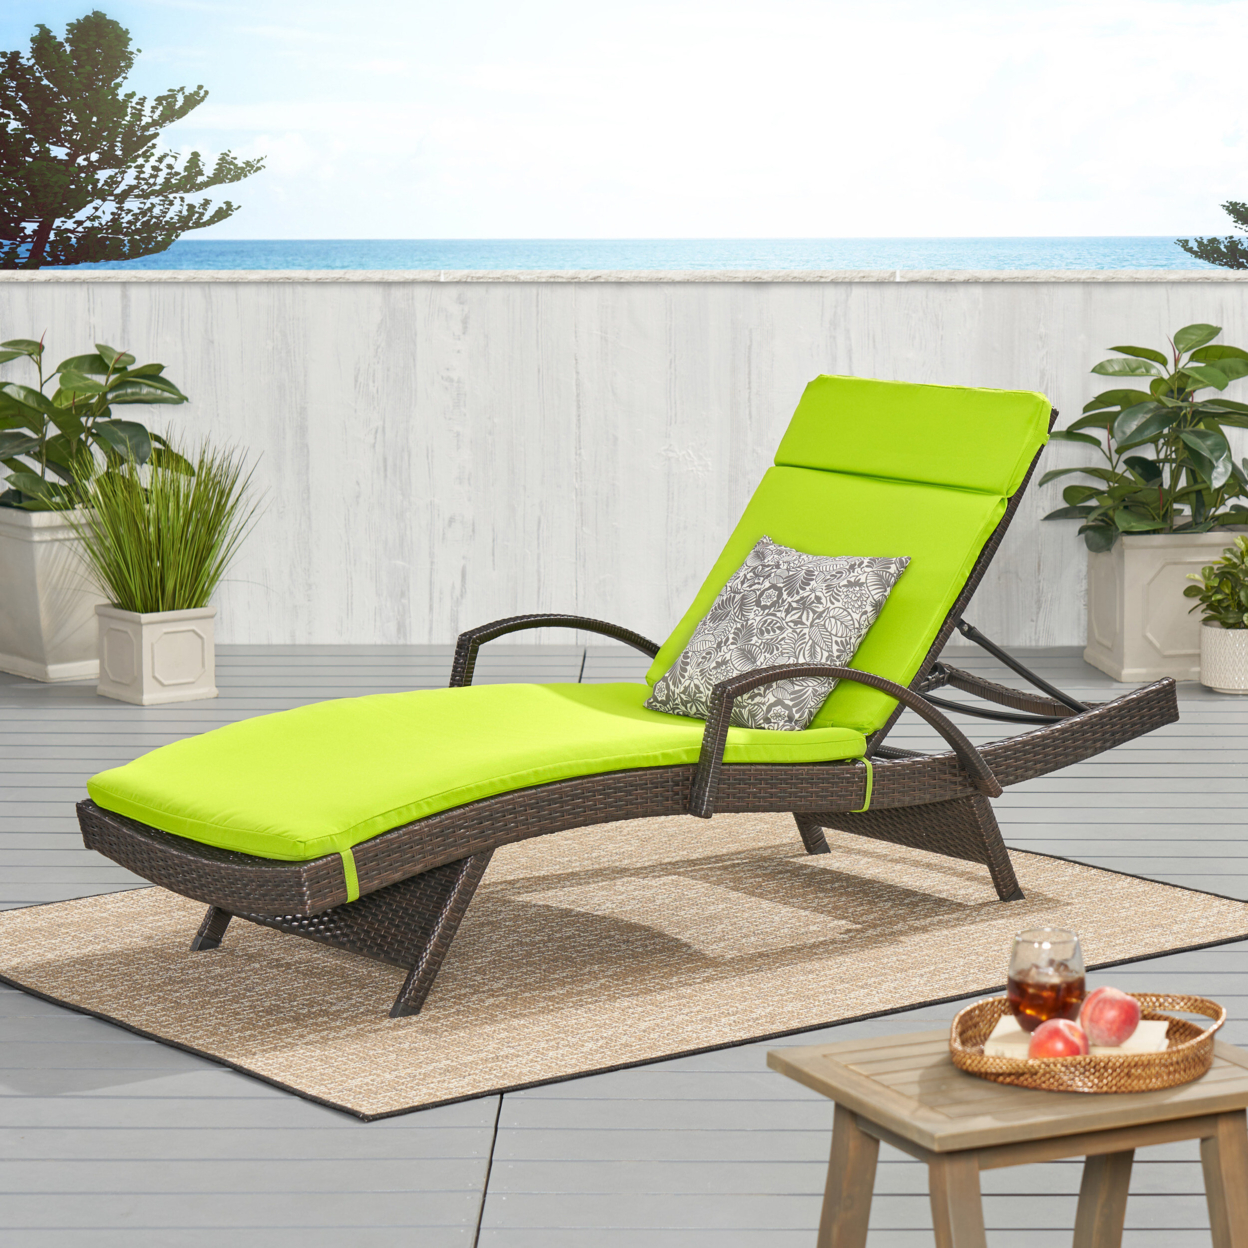 Lakeport Outdoor Adjustable Armed Chaise Lounge Chair With Cushion - Green Cushion